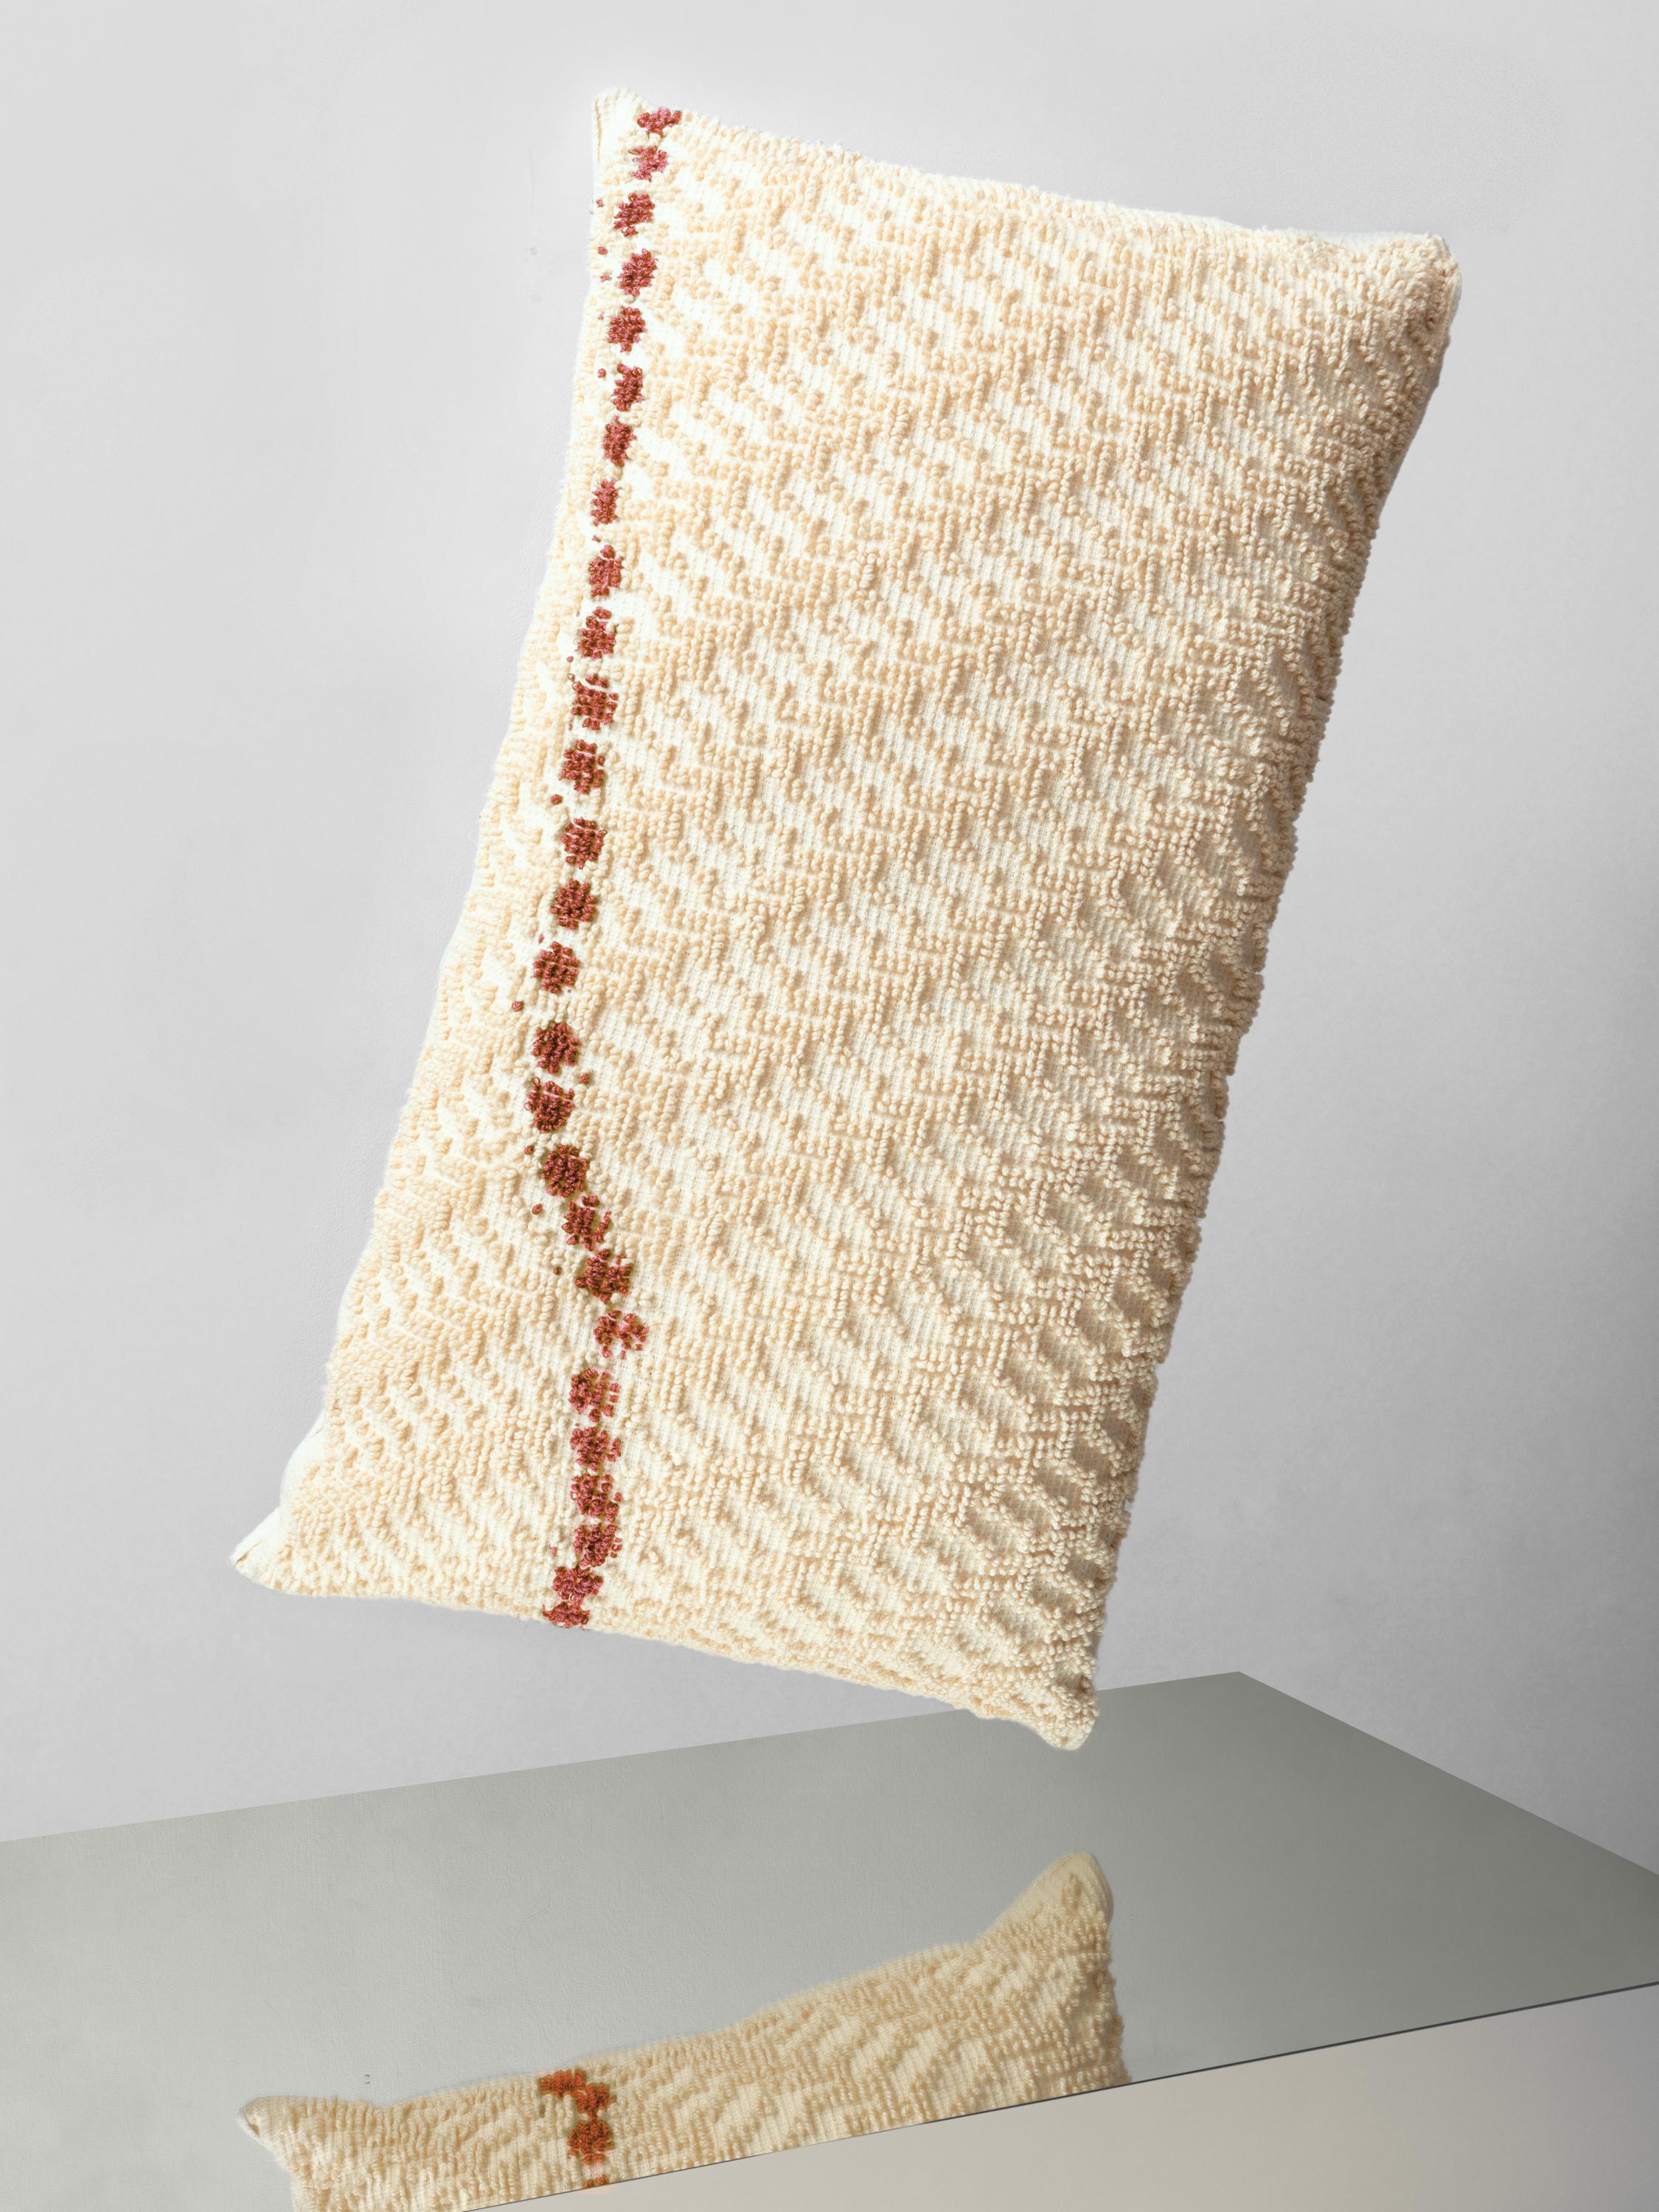 The ORMA cushion collection by Sophie Dries.

Details: 
Material: 100% natural cotton
Dimensions: 48H x 30W cm
Primary color: Natural white
Made in Calabria, Italy
Due to the handcrafted nature of the product, size may vary by up to 5%
In stock